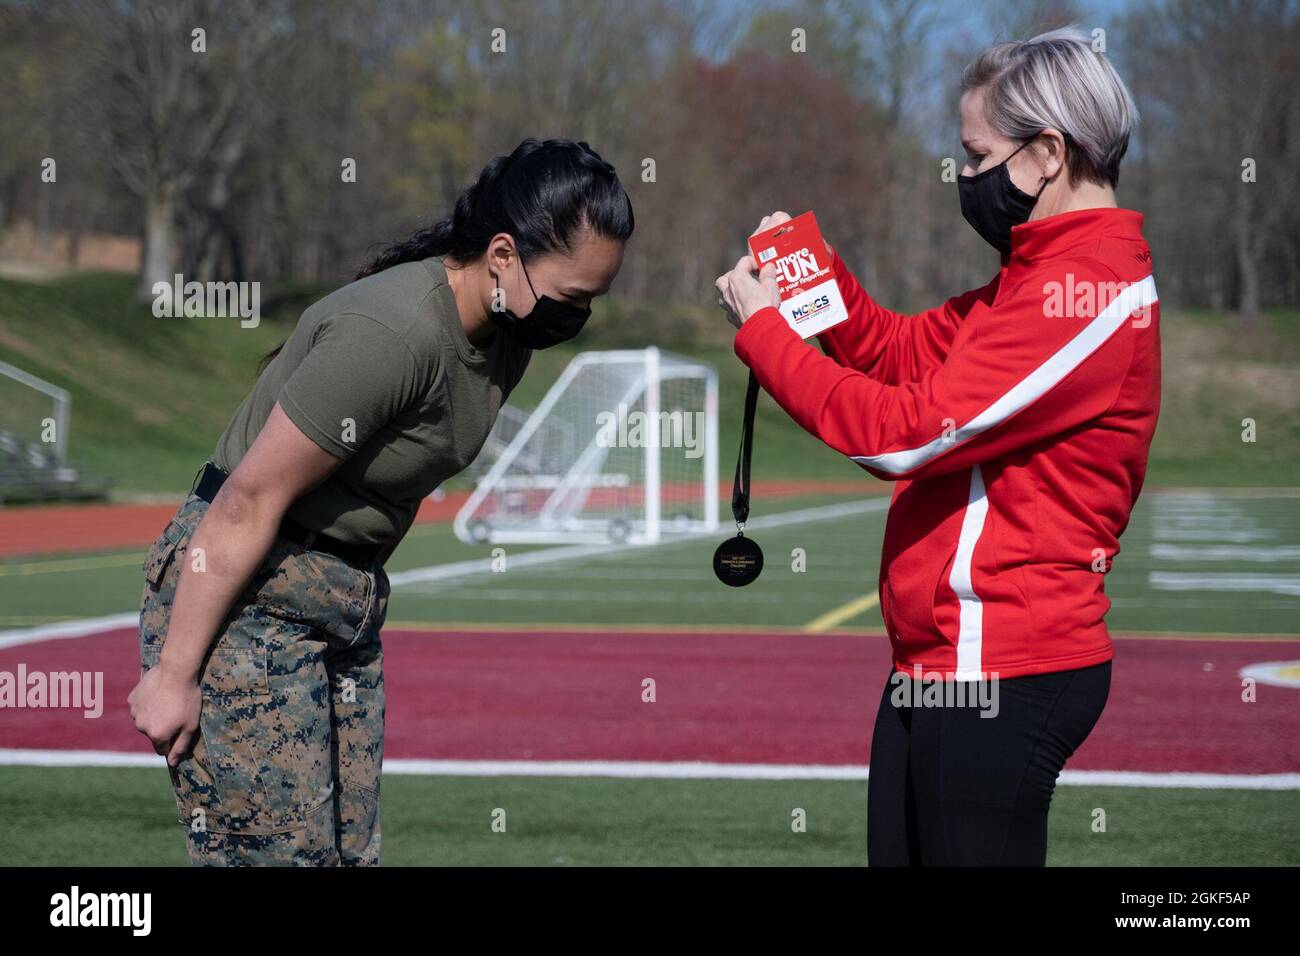 U.S. Marine Corps Sgt. Davonn Vong with Headquarters and Service Battalion receives her first-place medal at Butler Stadium, Marine Corps Base Quantico, Va., Apr. 6, 2021. Vong receives her medal for finishing at the top of her age and gender group. Stock Photo